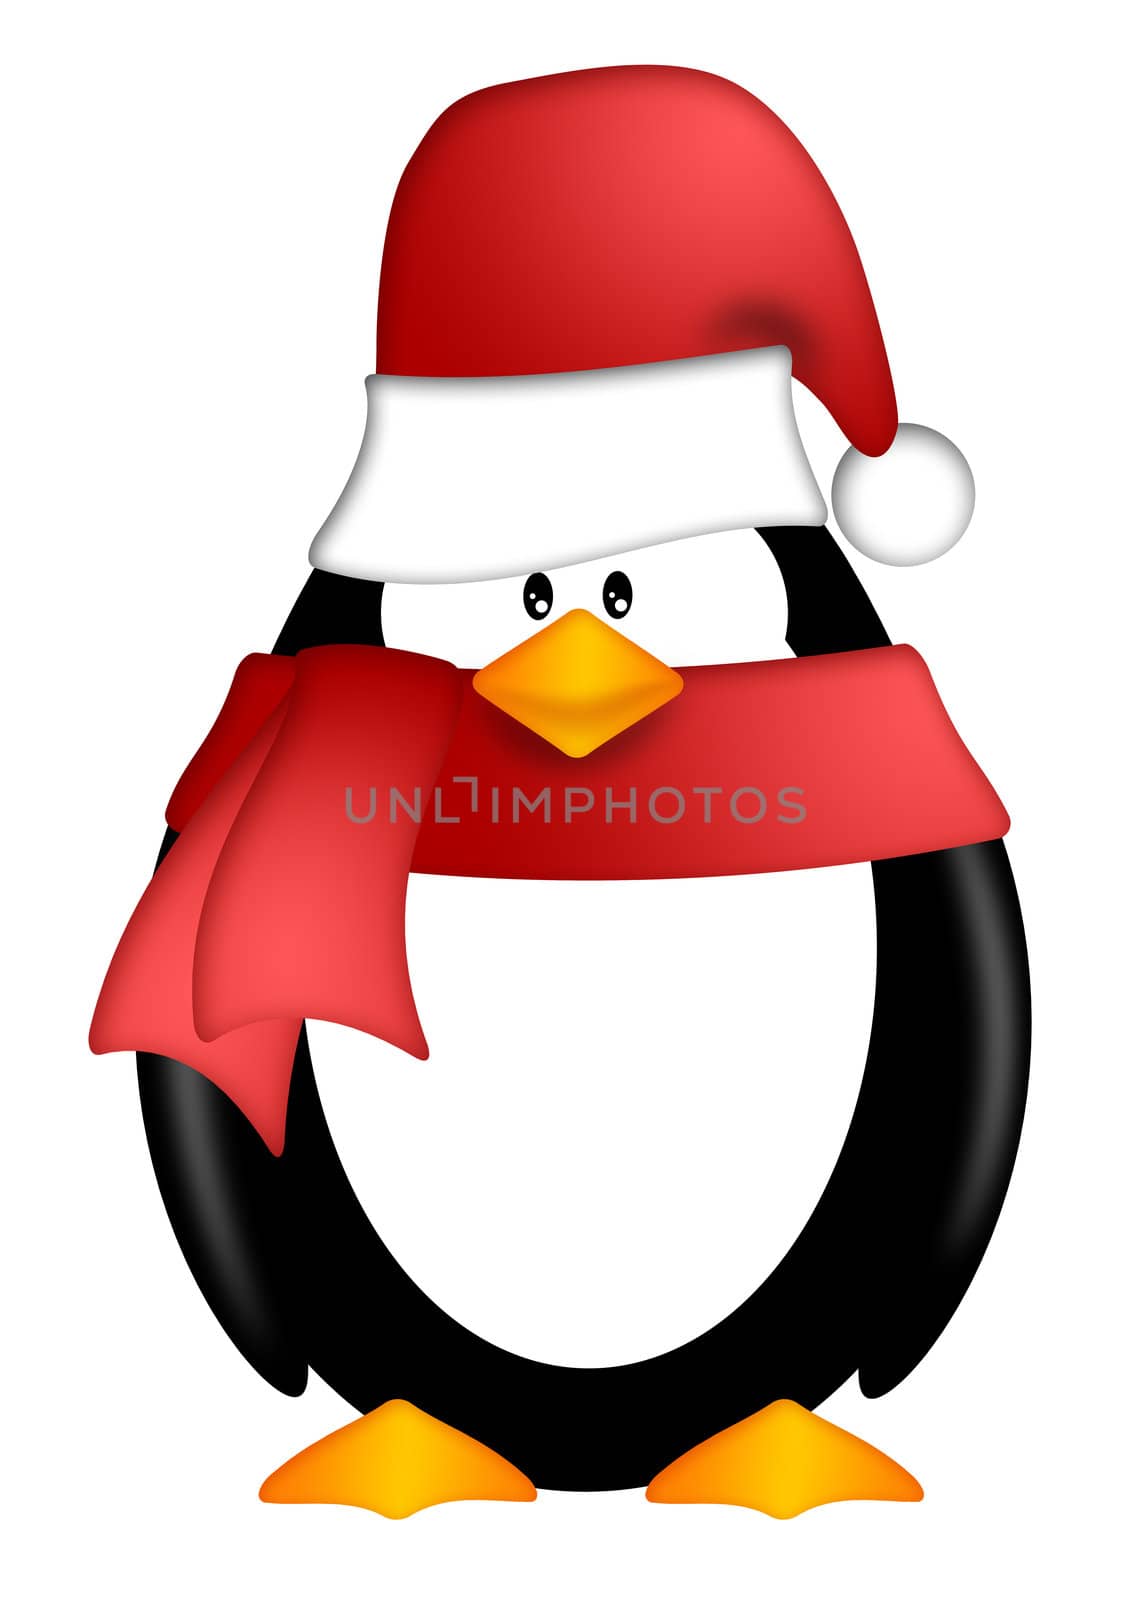 Cute Cartoon Penguin with Santa Hat and Red Scarf Illustration Isolated on White Background